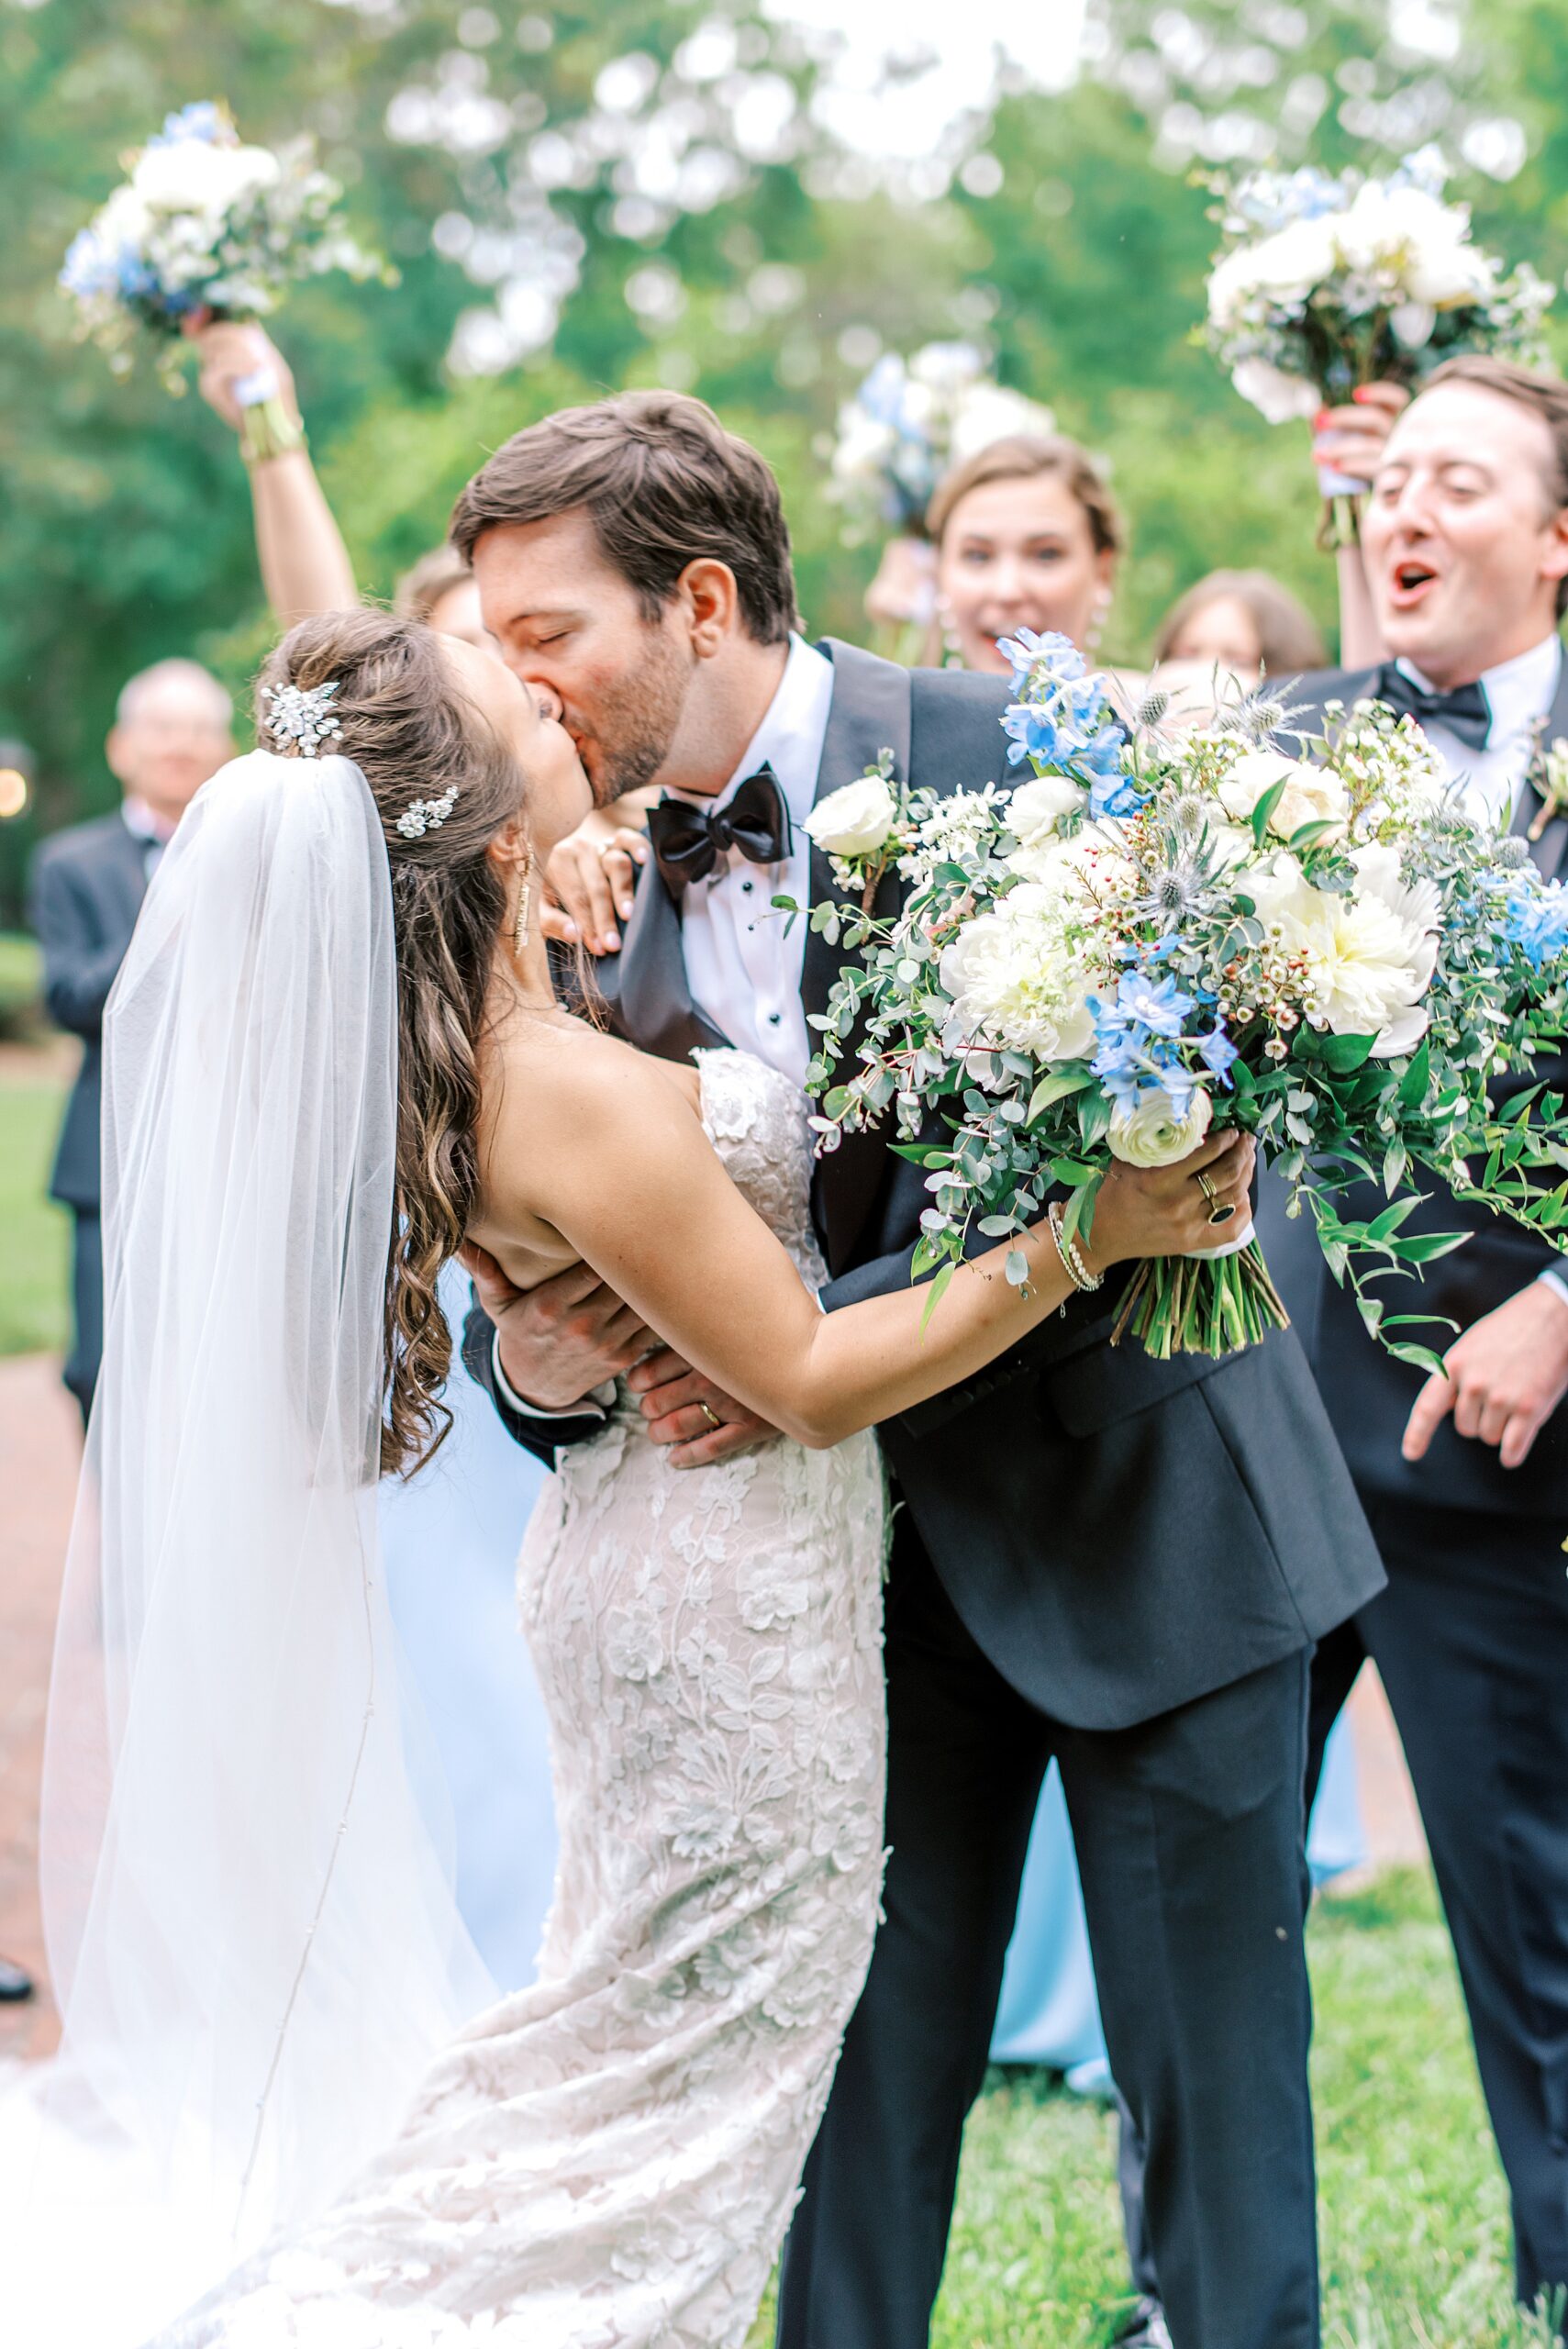 Newlyweds kiss for the first time while their wedding party cheer behind them holding white and blue florals at a charlotte country club wedding